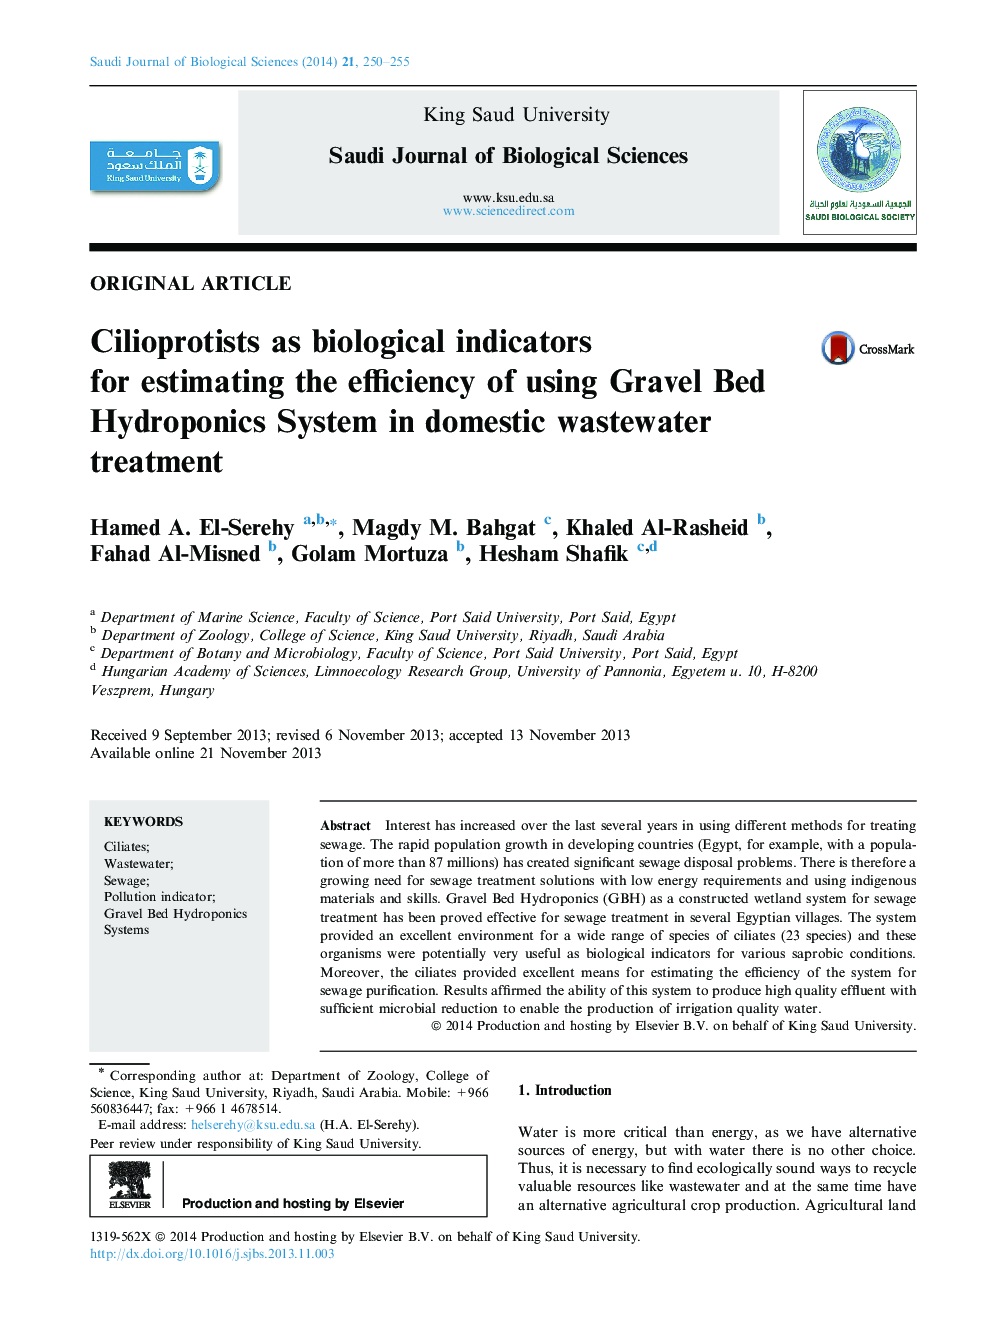 Cilioprotists as biological indicators for estimating the efficiency of using Gravel Bed Hydroponics System in domestic wastewater treatment 